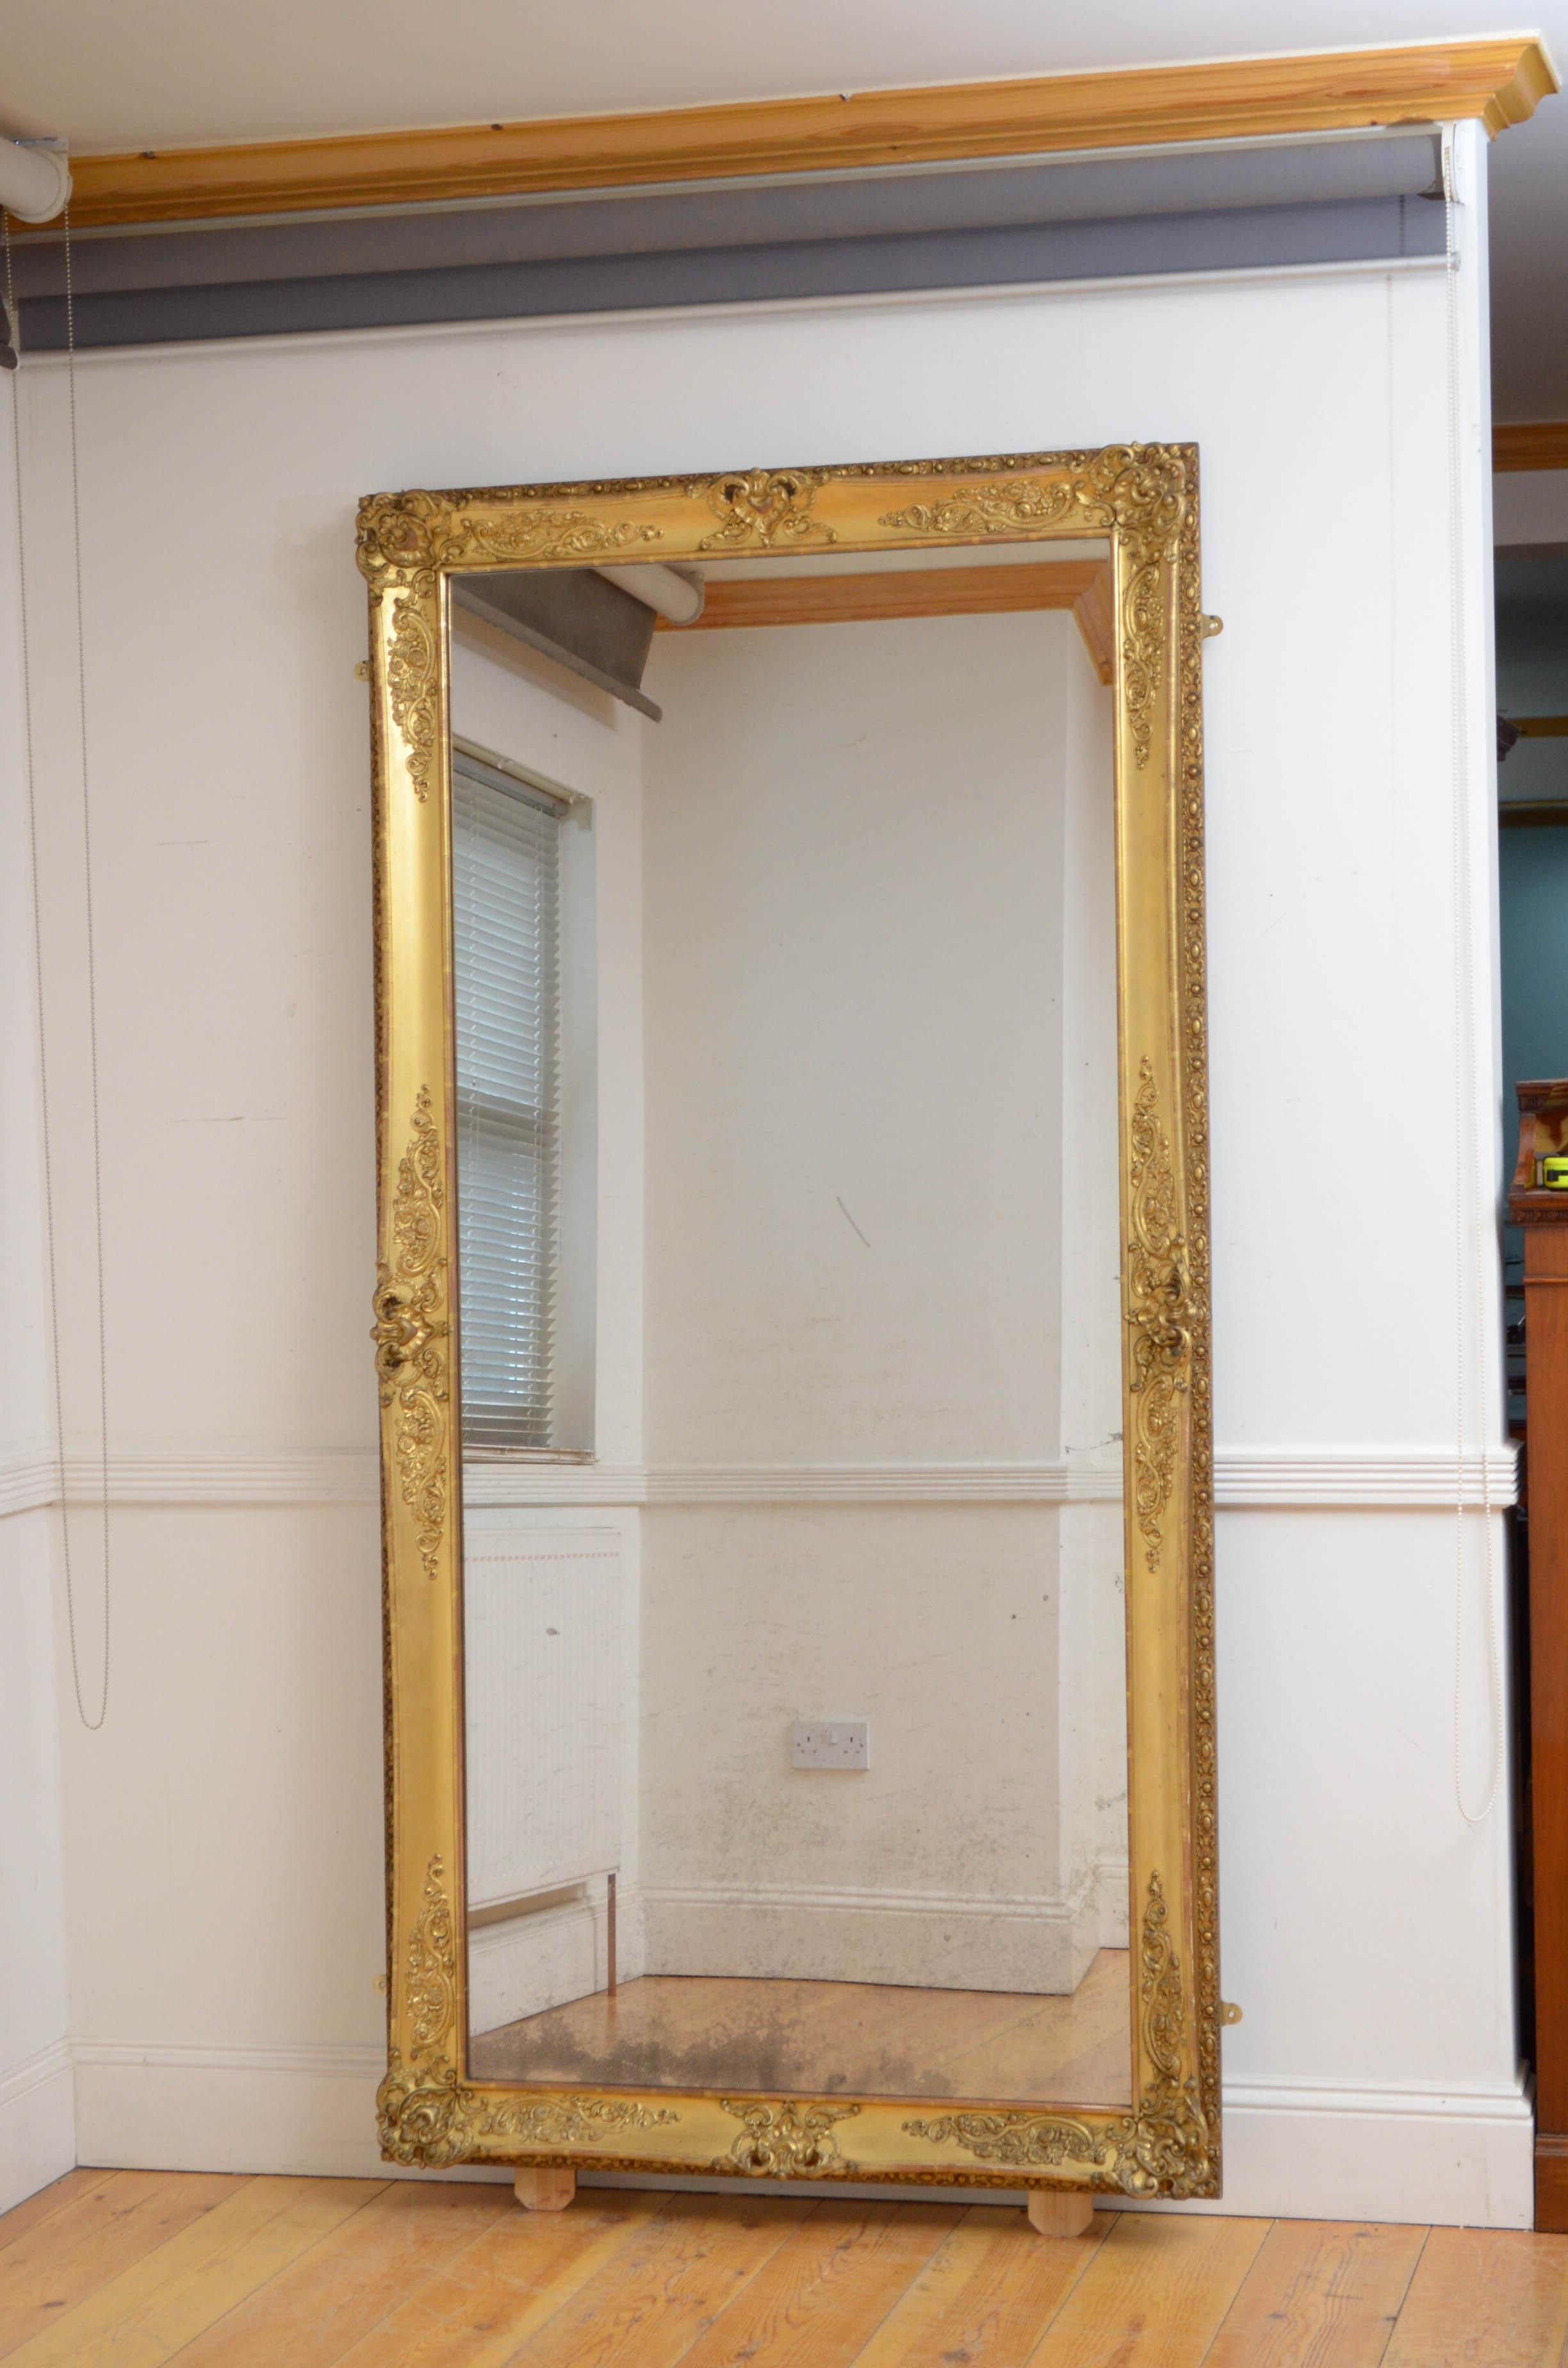 K0 Superb XIXth century French giltwood mirror of versatile form, can be position horizontally or vertically, having original glass with characterful foxing in giltwood frame. The frame is decorated with scrolls and floral motifs to each corners and